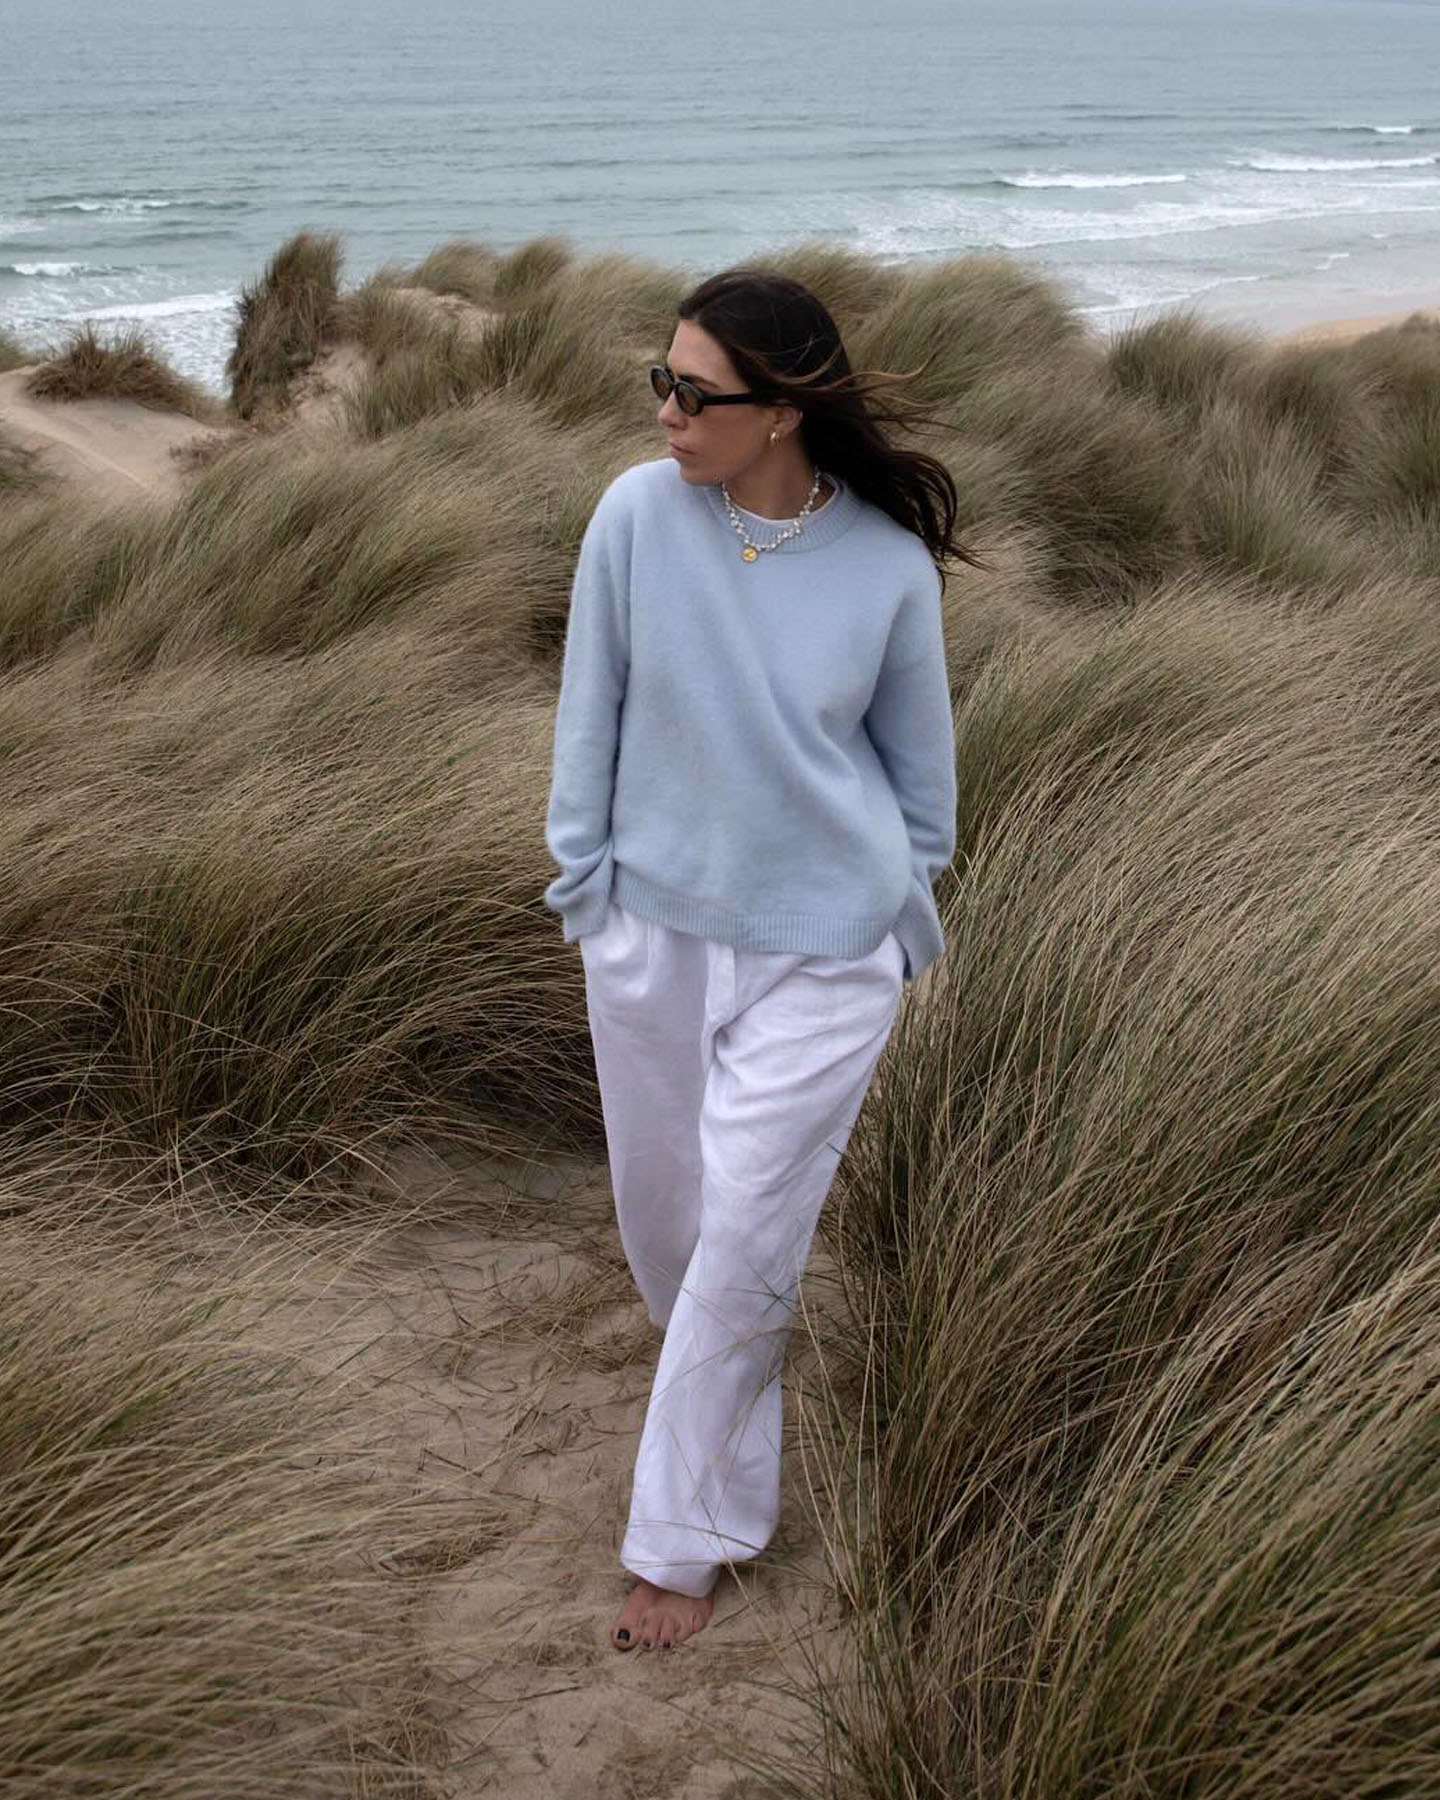 fashion influencer Jessica Skye strolls on the beach wearing oval sunglasses, a light blue sweater, pearl necklace, and white linen pants